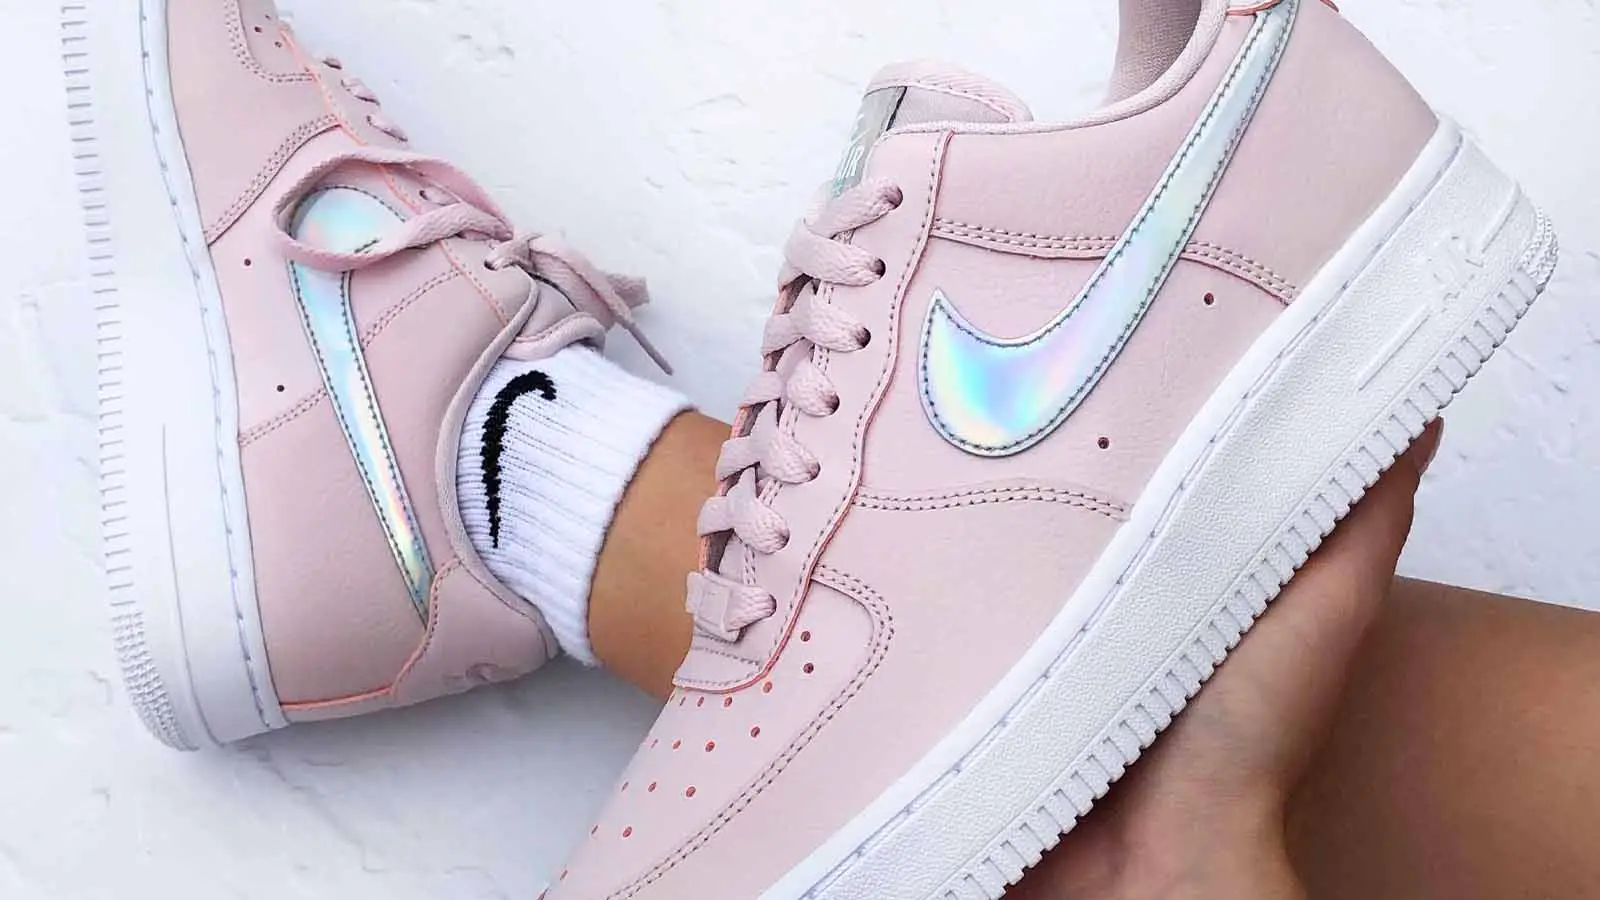 Check Out the New Nike Air Force 1 Hoops Pack Here